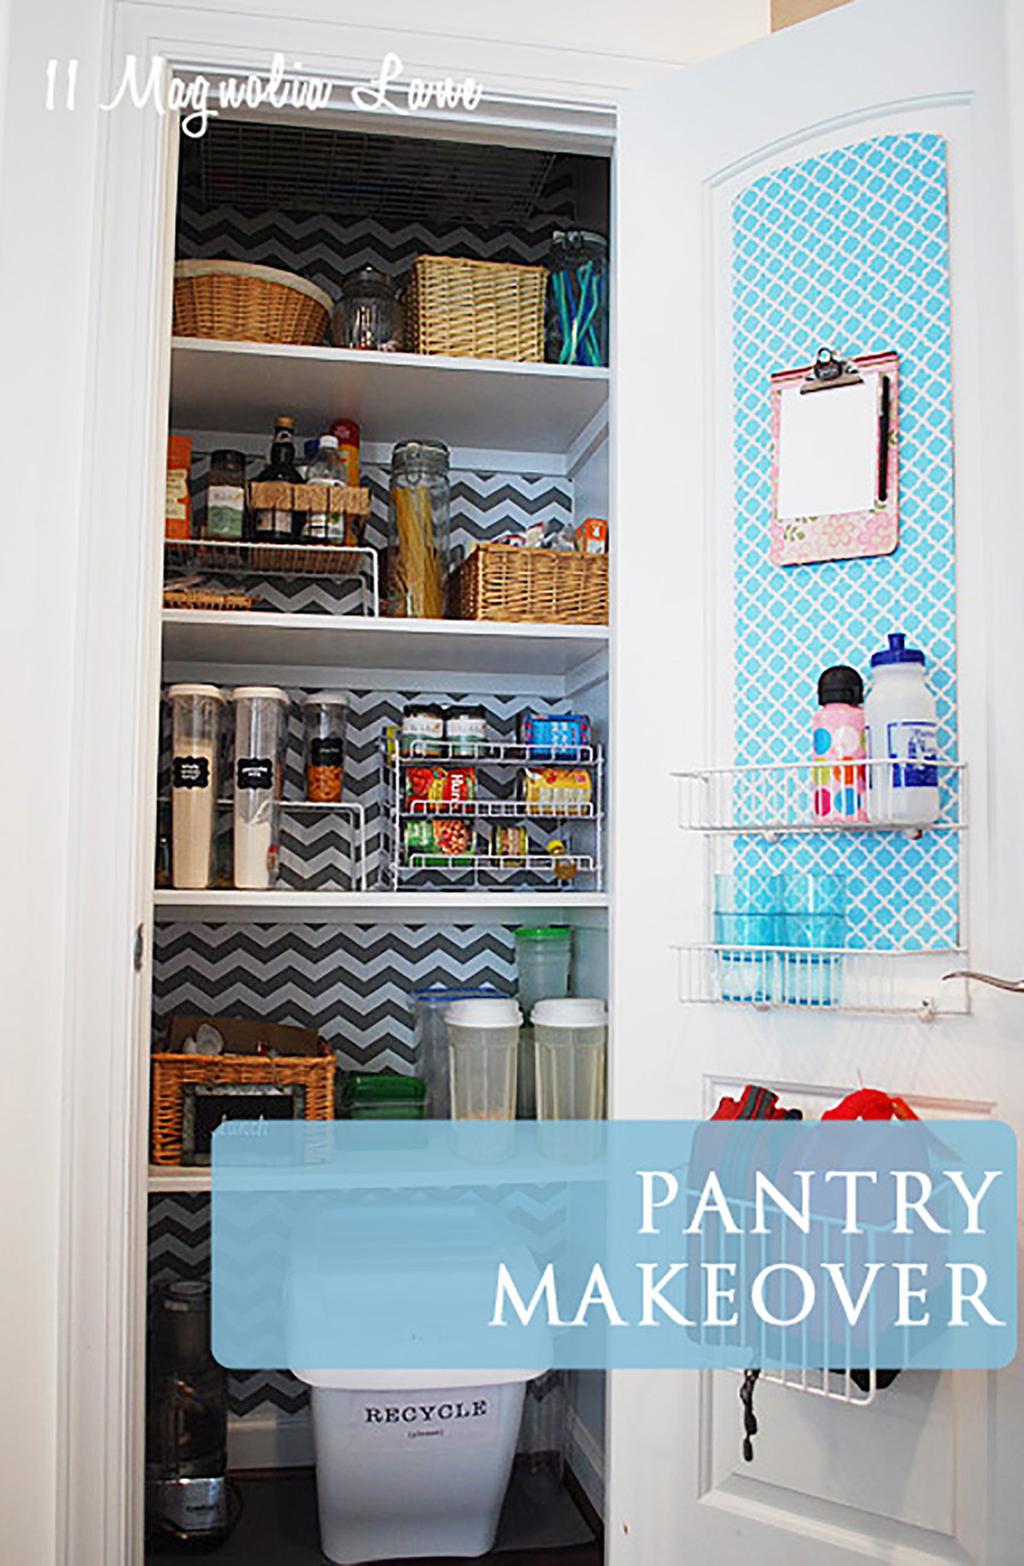 small pantry makeover In Amy s fomer home she had a very small pantry and limited storage. Making the space function as efficiently as possible was key.